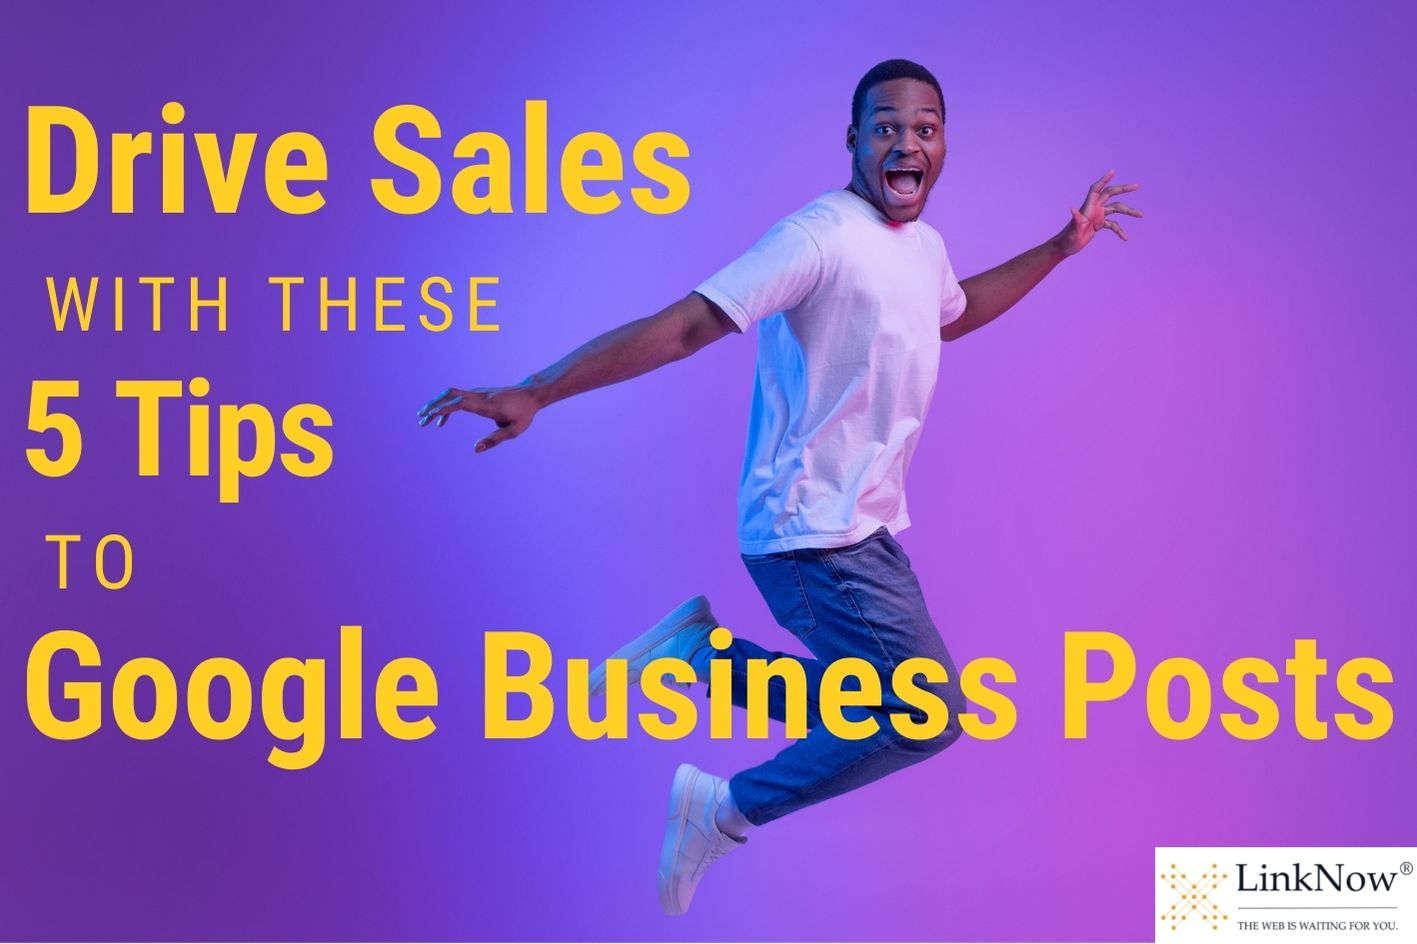 Man jumping in the air while smiling. Text says: Drive sales with these 5 tips to Google Business Posts.